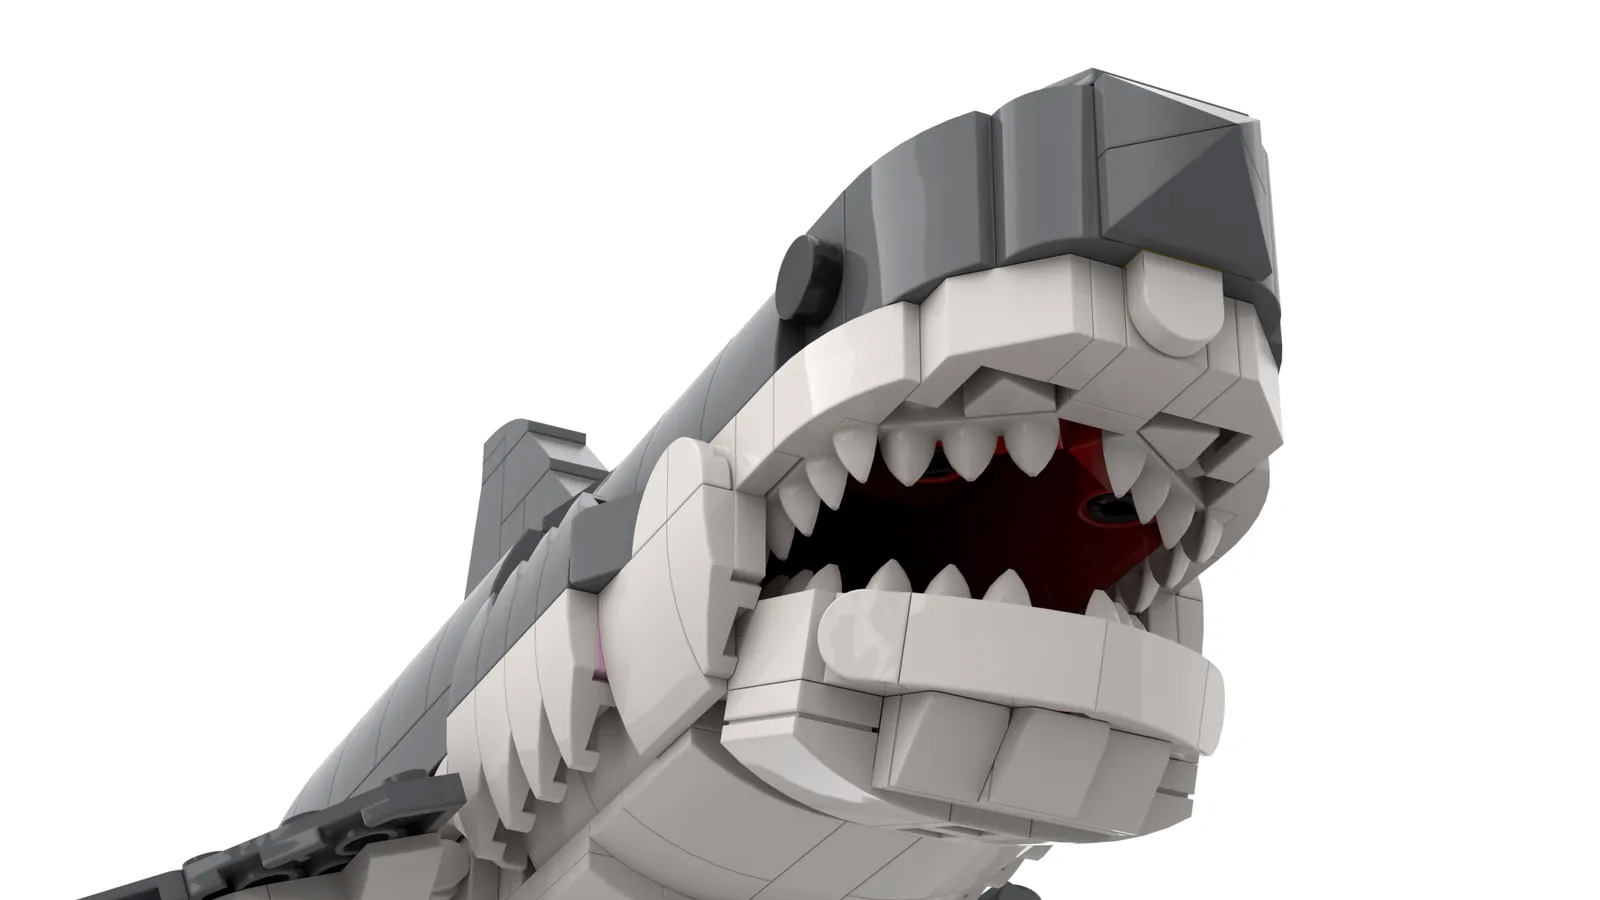 JAWS Achieves 10K Support on LEGO IDEAS